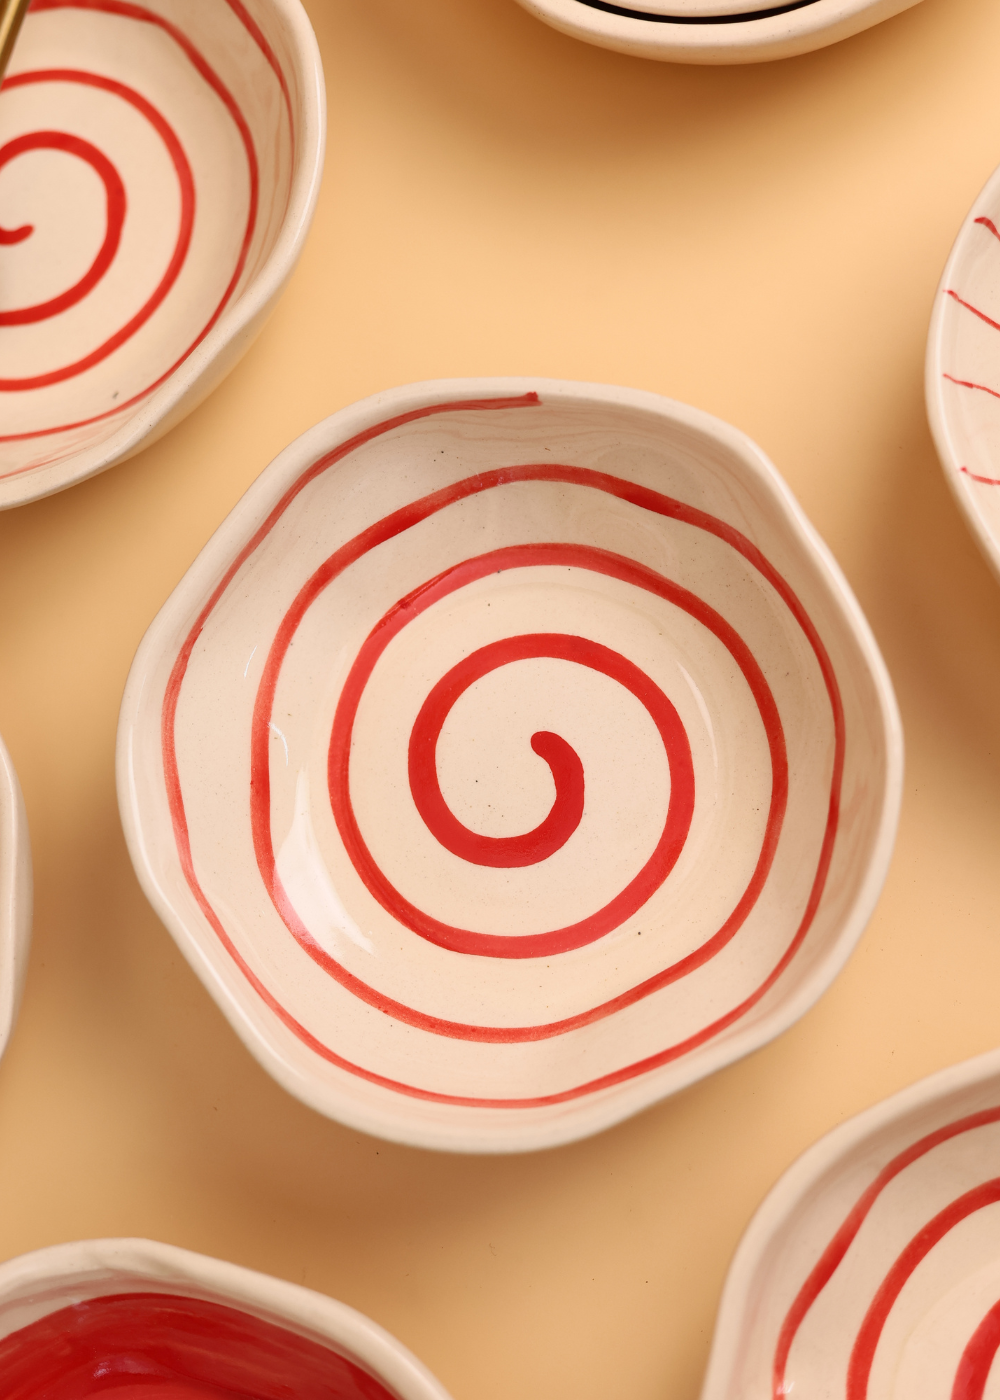 ceramic red spiral bowl with red & white color